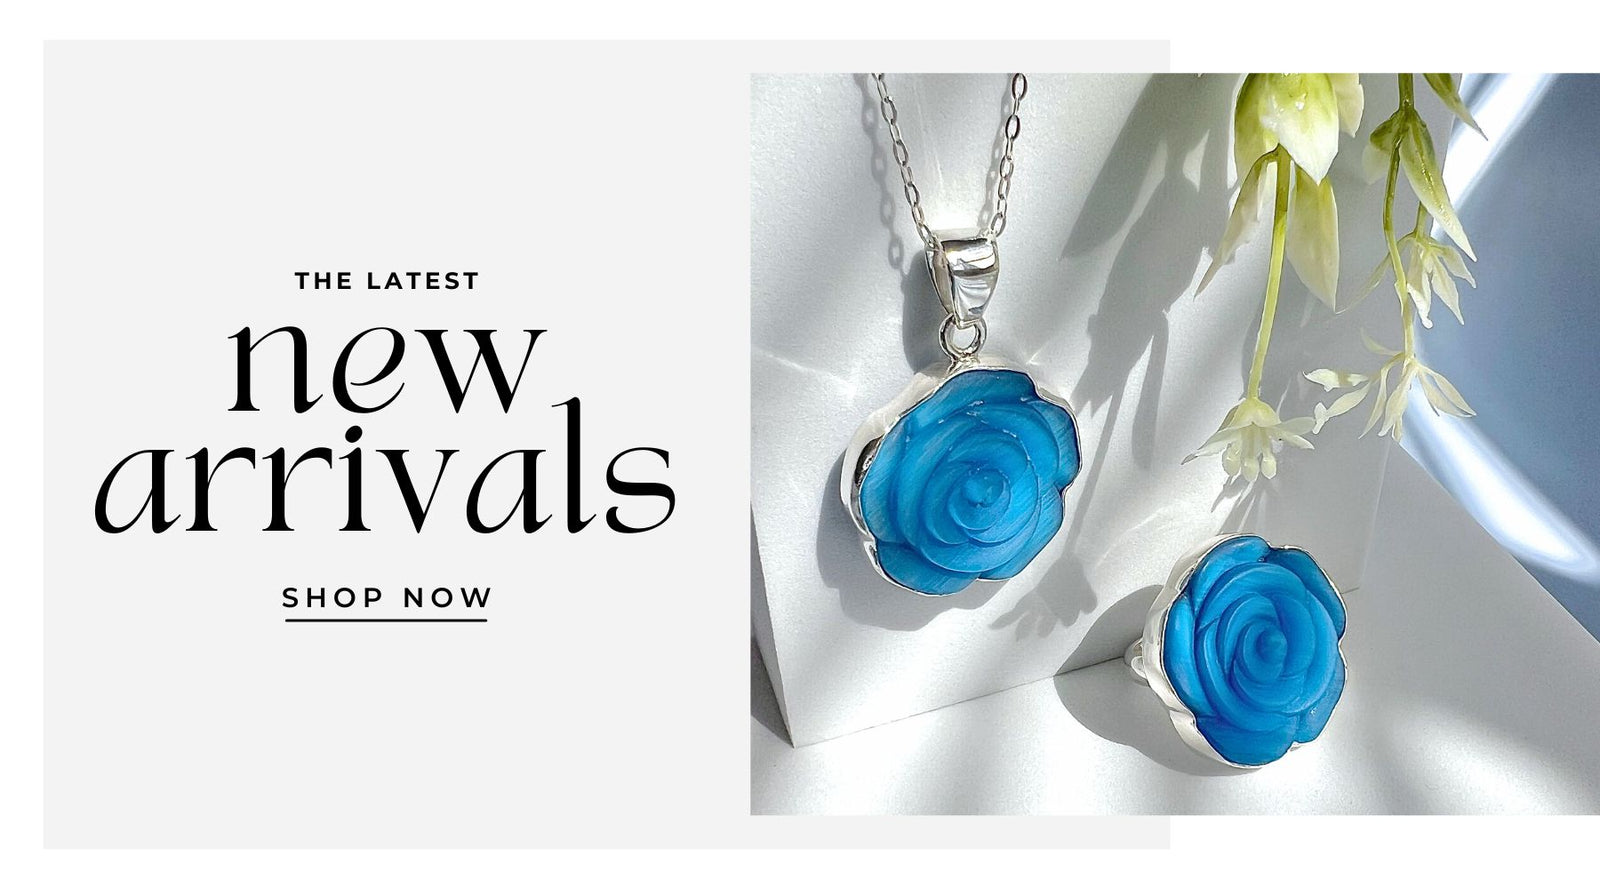 Shop the latest arrivals in Sterling Silver and Alchemia from Charles Albert jewelry.